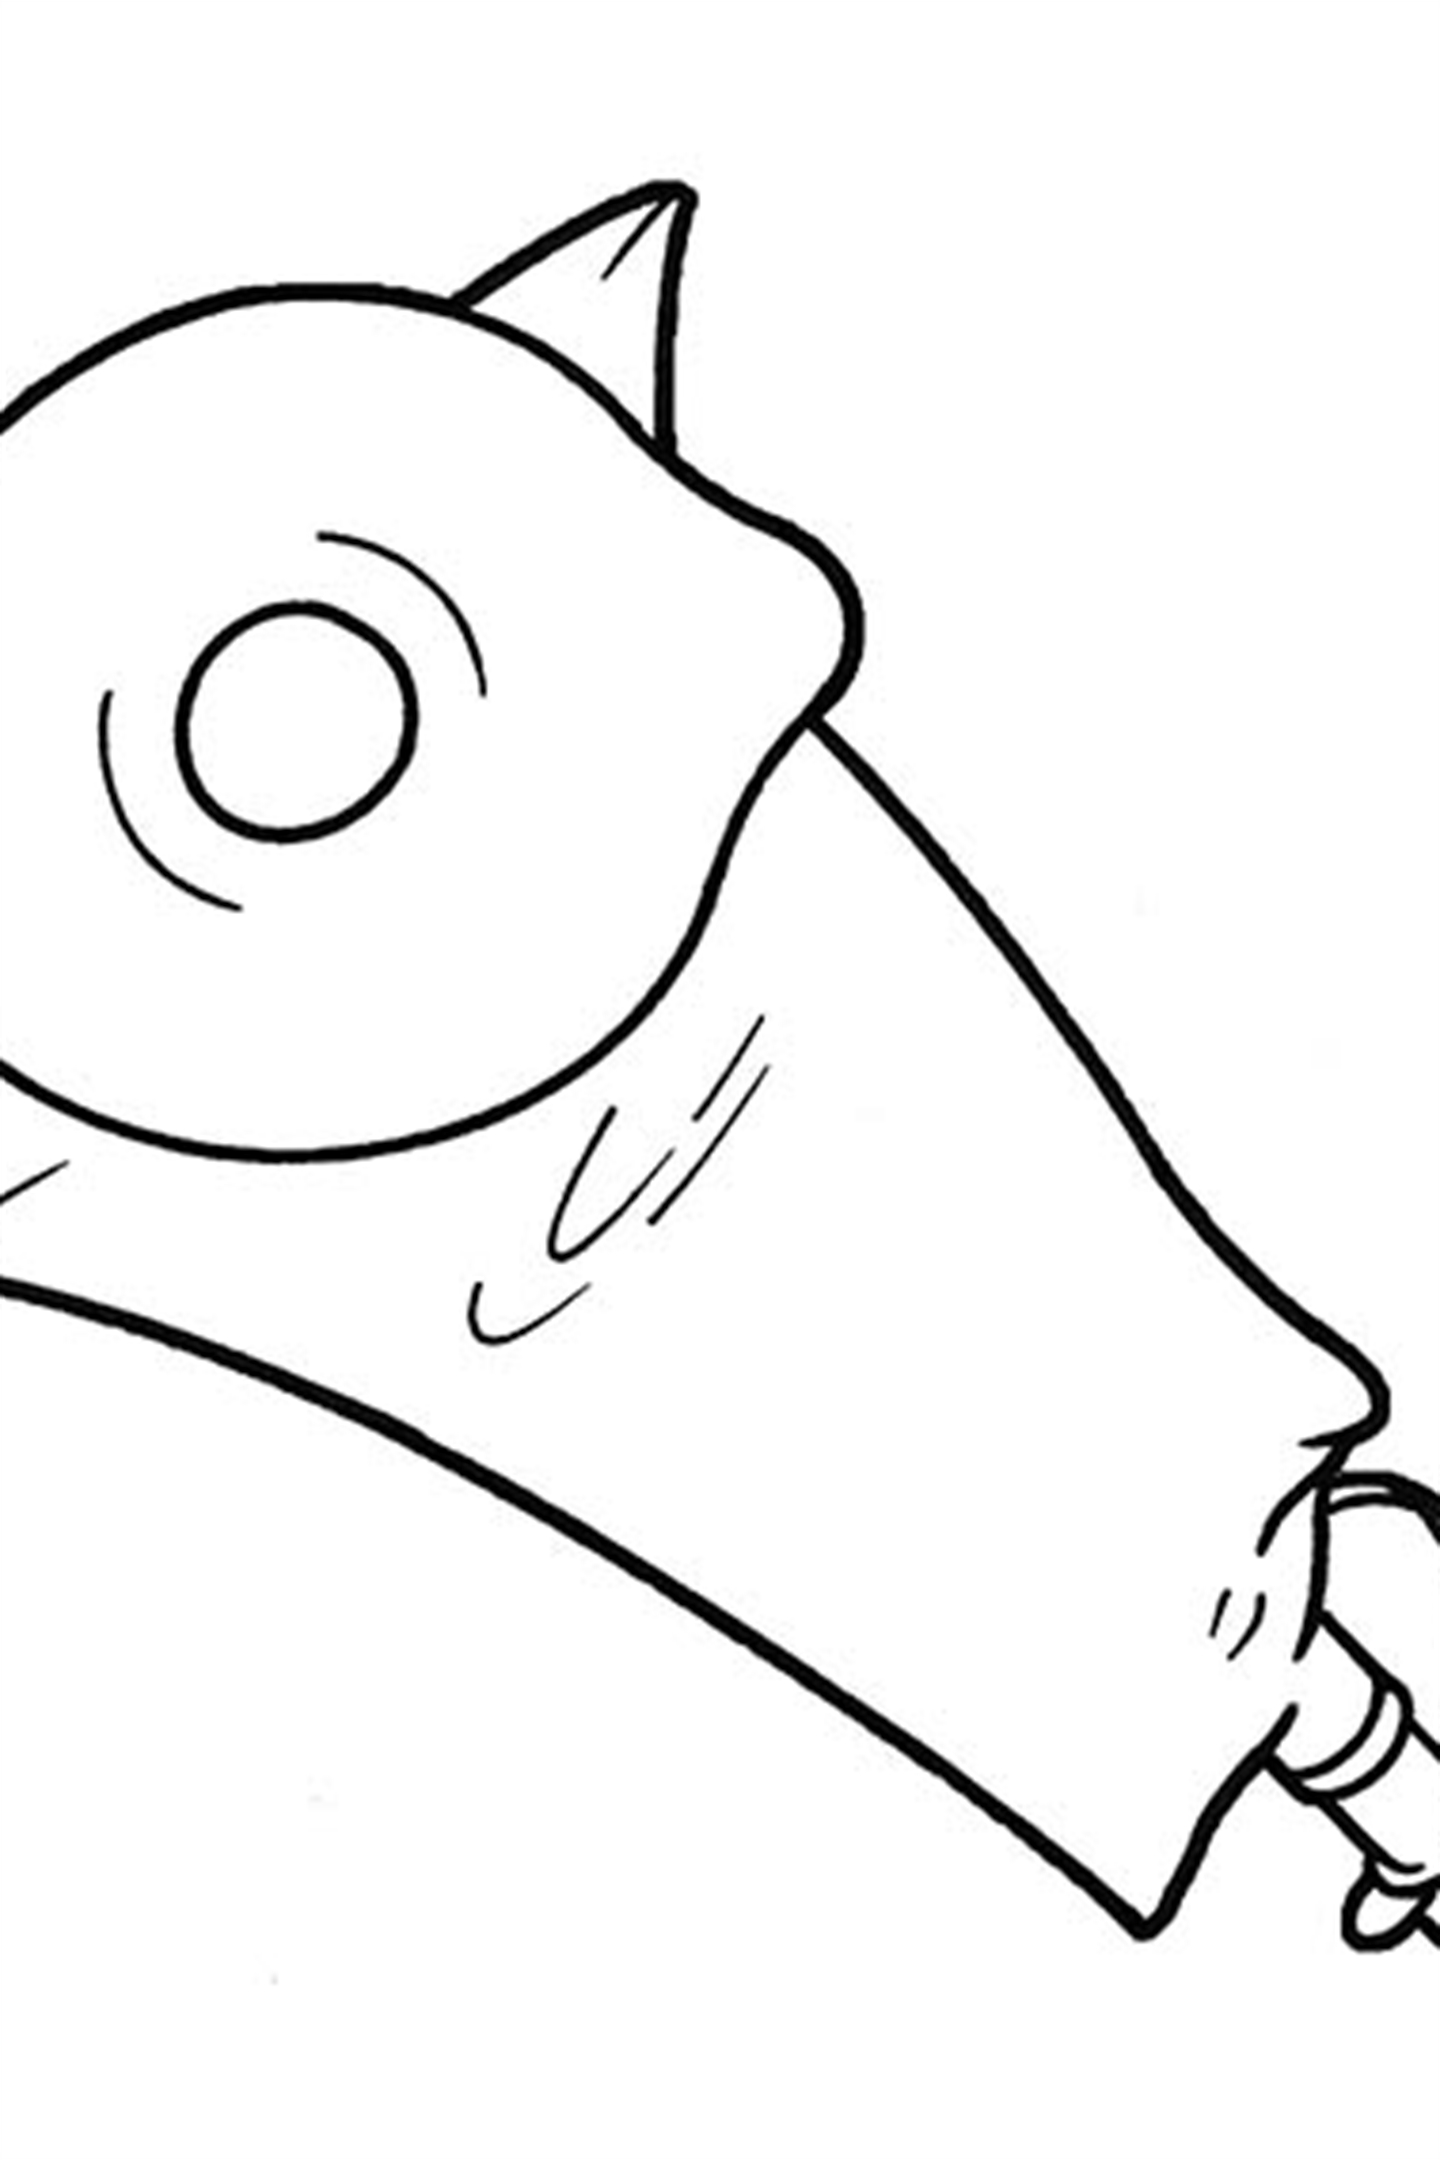 Penile pouch - line drawing